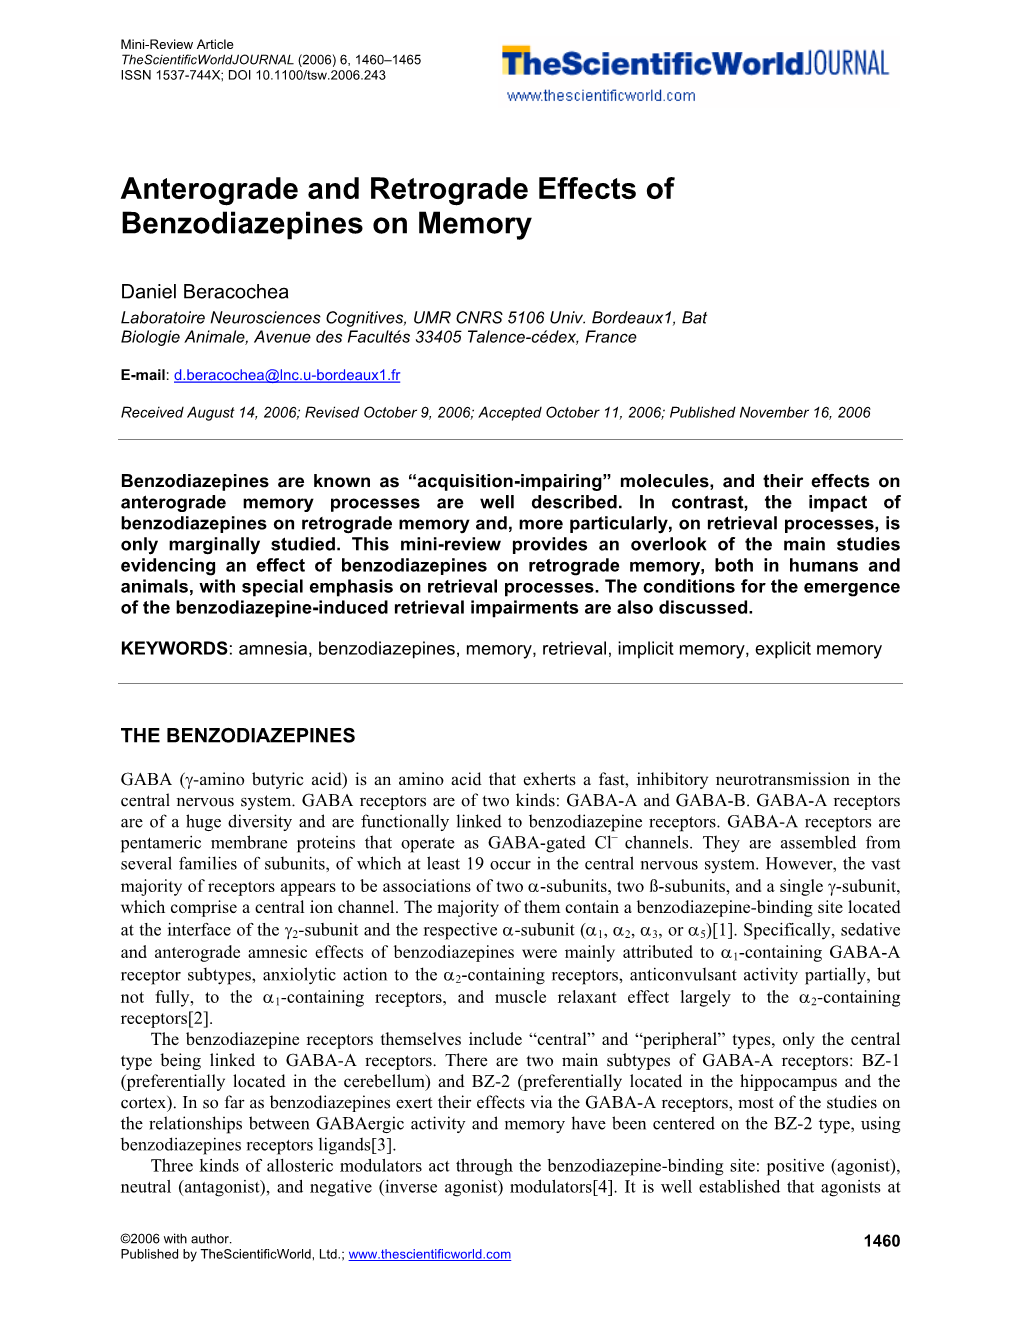 Anterograde and Retrograde Effects of Benzodiazepines on Memory